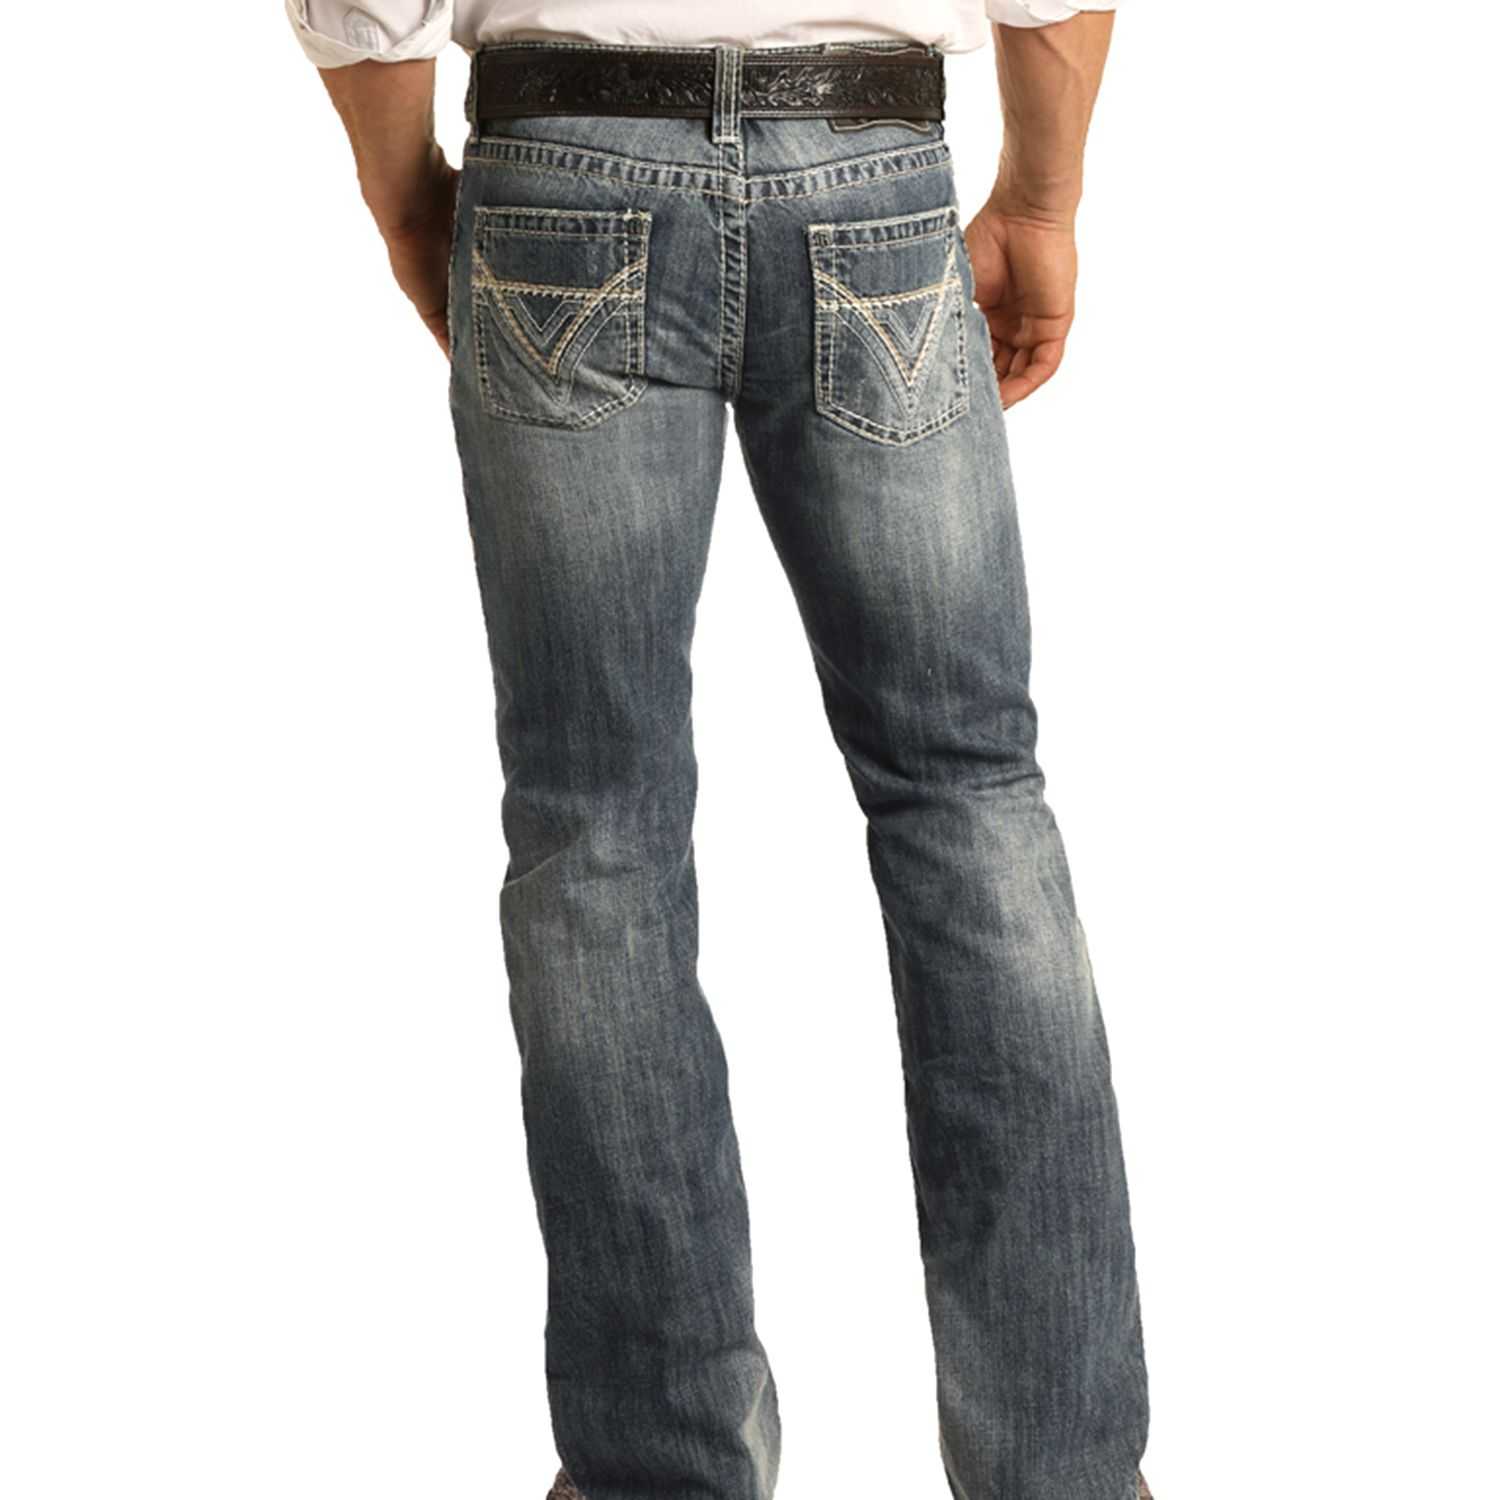 Rock and Roll Cowboy Pistol Back Pocket Embroidery Mens Slim Fit Boot Cut Jean